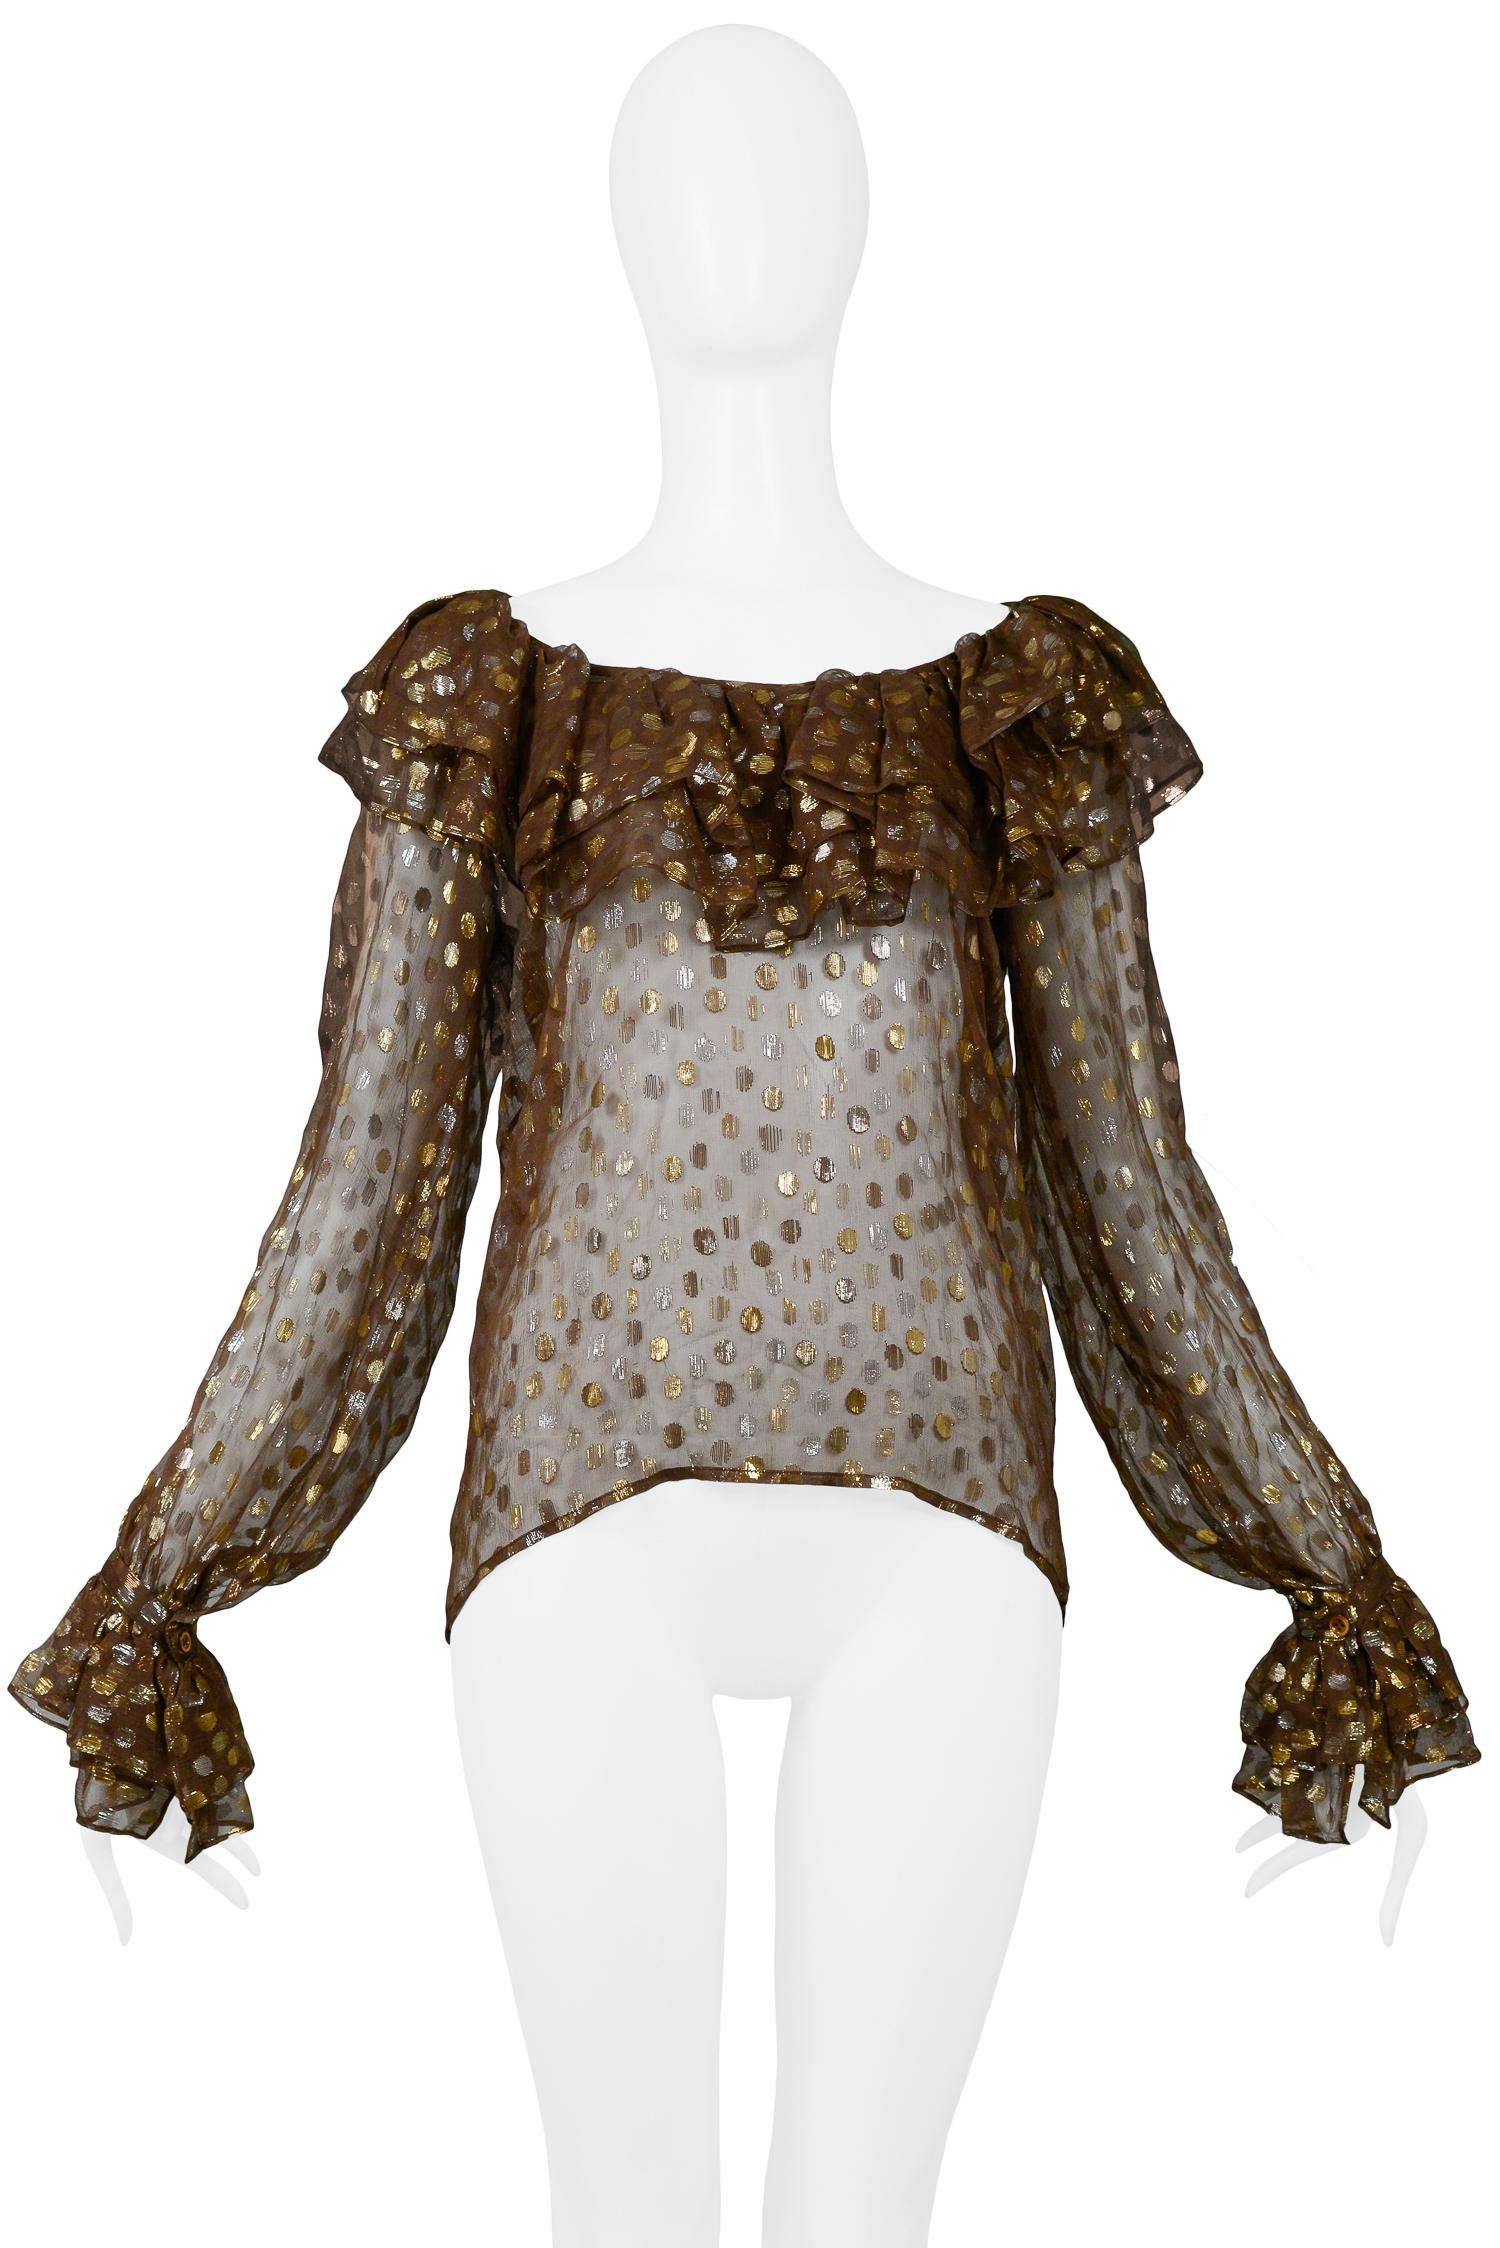 Vintage Yves Saint Laurent brown chiffon blouse featuring a metallic print of gold & silver dots, blouson sleeves with layered ruffle detail at wrists and neckline. 

Excellent Condition.

Size 38